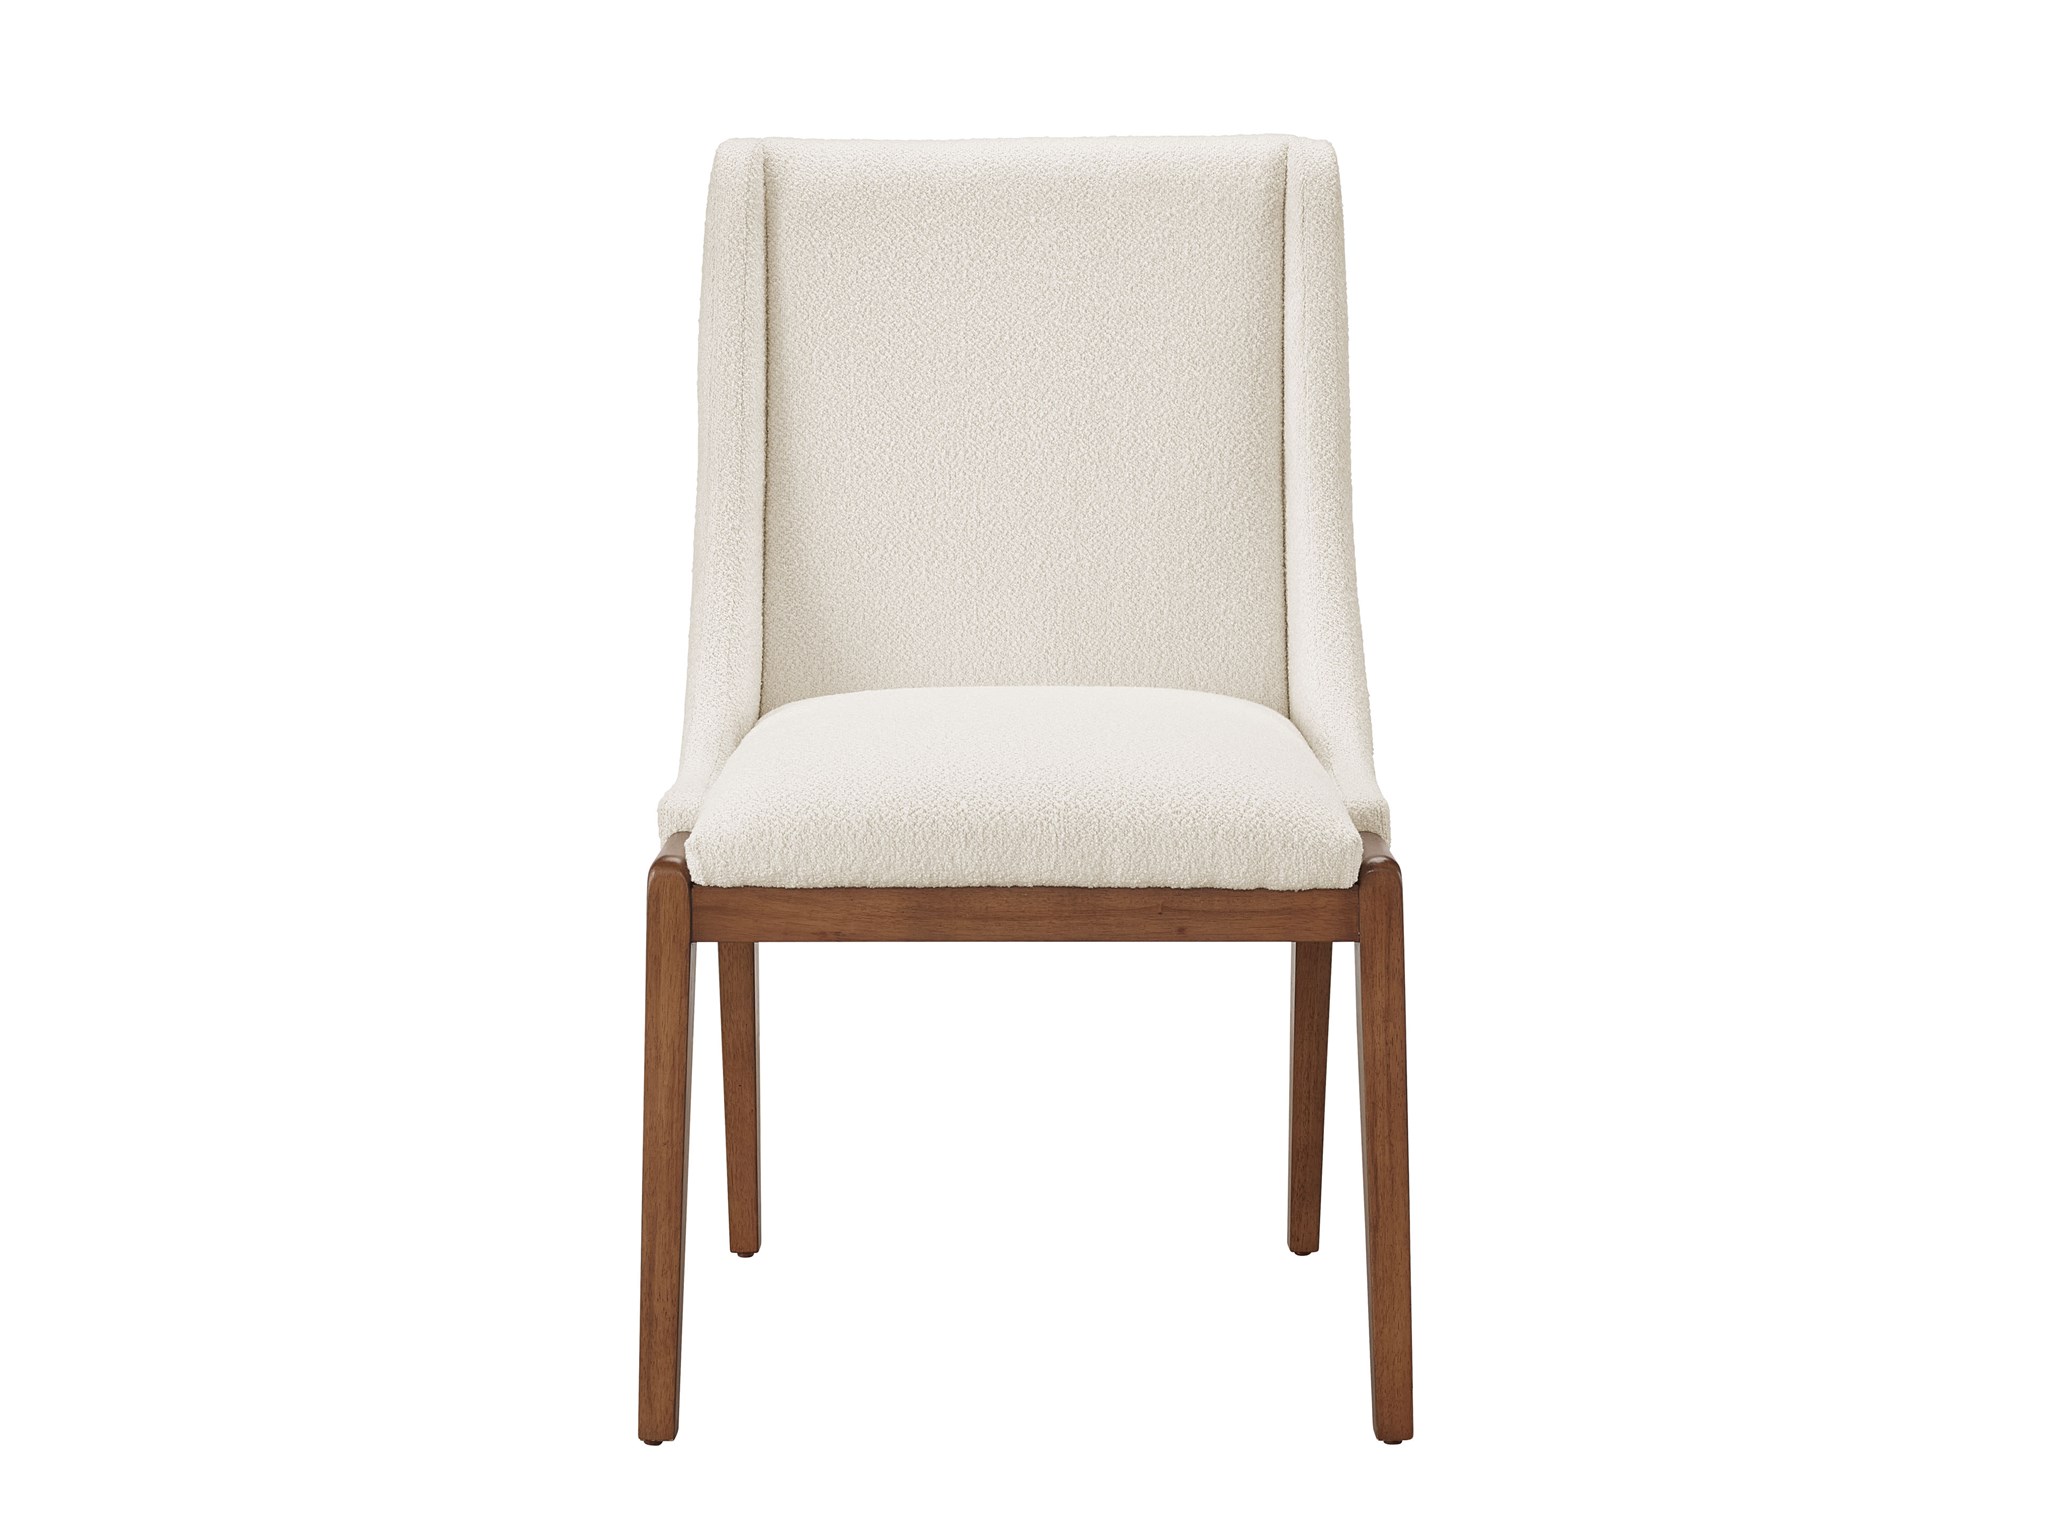 Tranquility Dining Chair